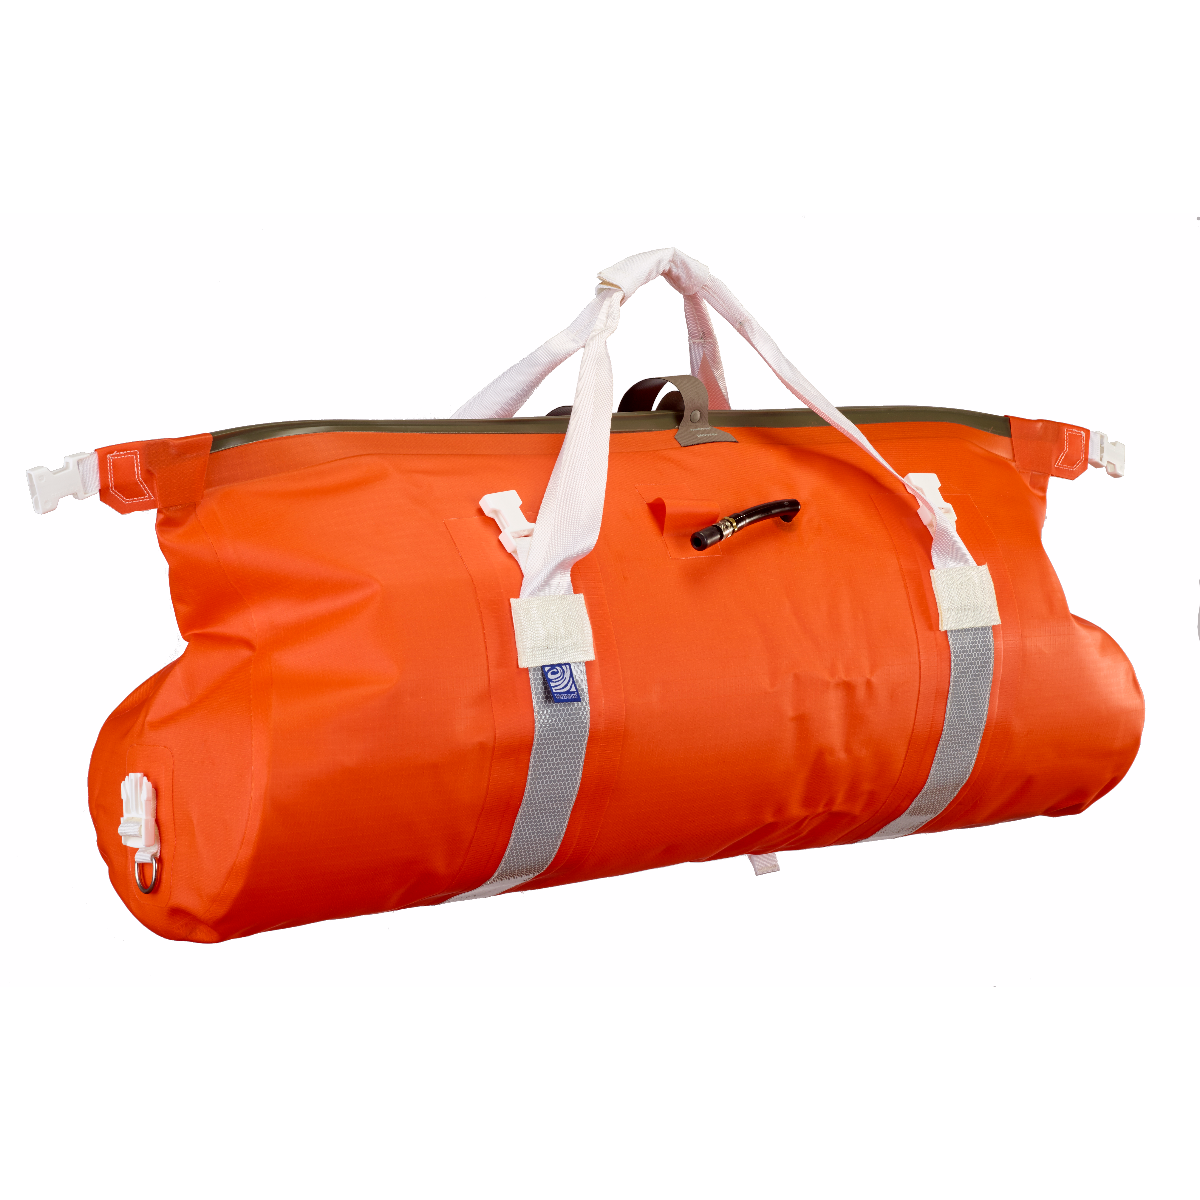 Survival Equipment Bag, Large™ - Watershed Drybags